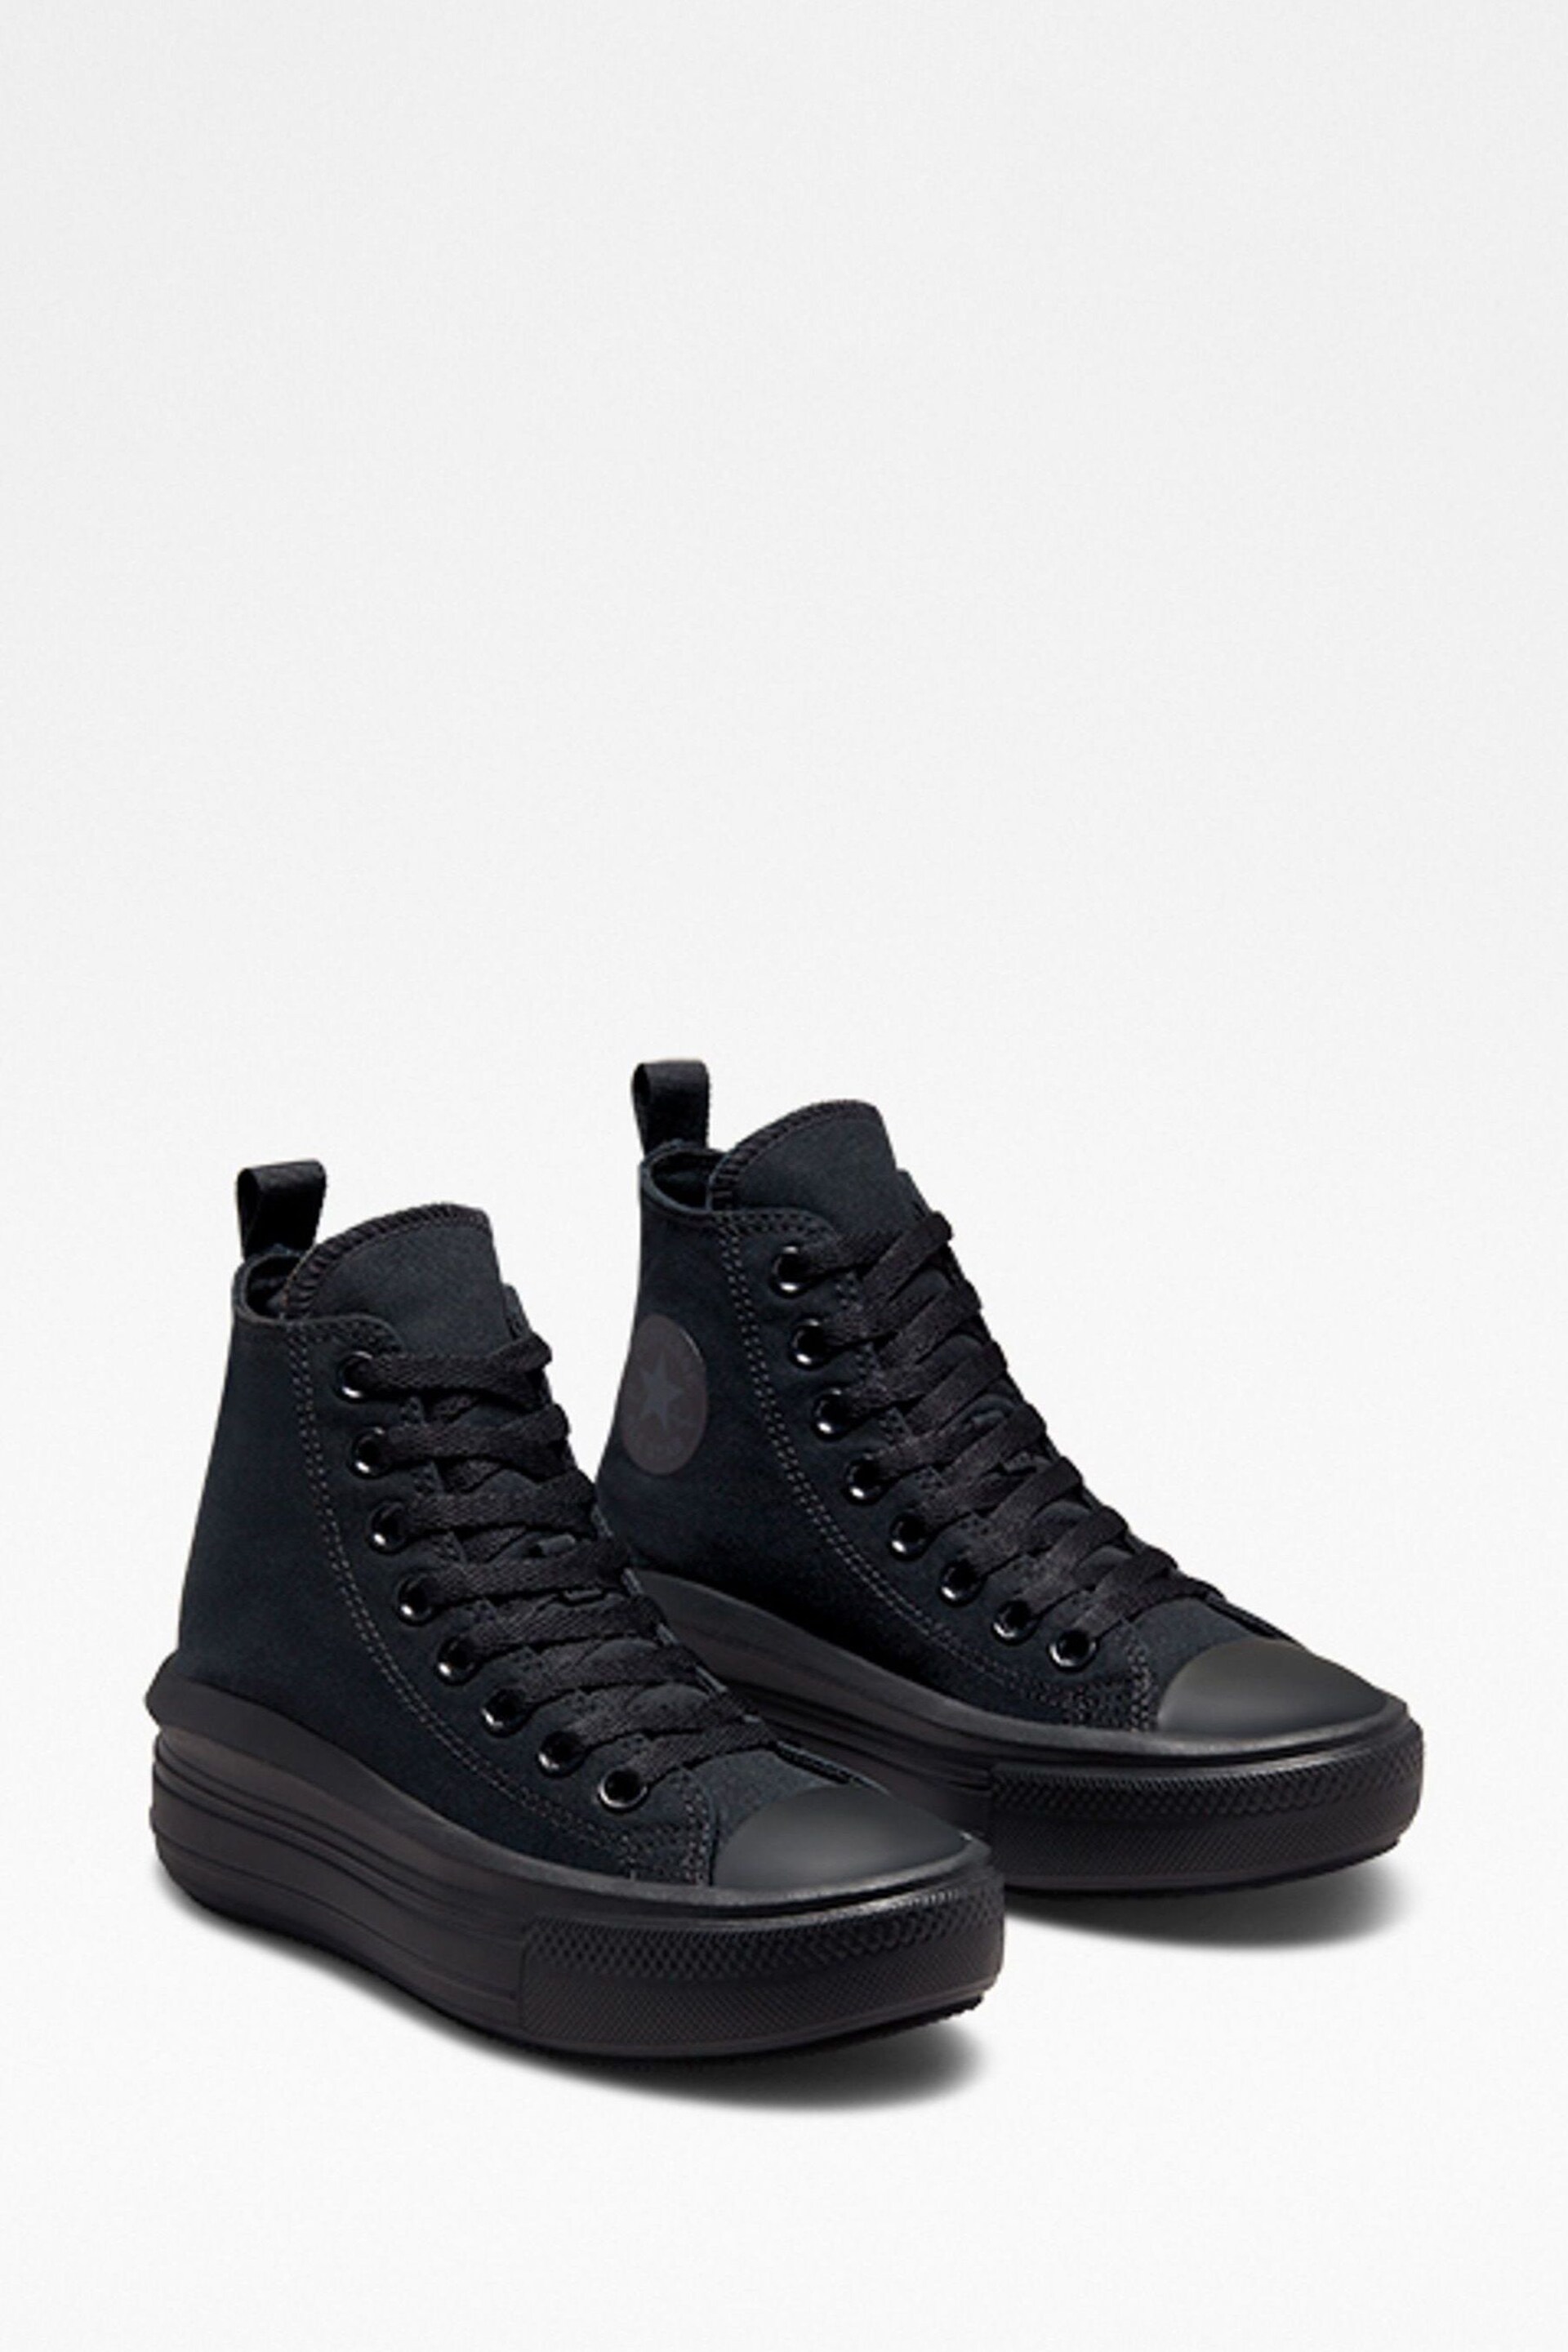 Converse Black Move High Top Youth Trainers - Image 3 of 6